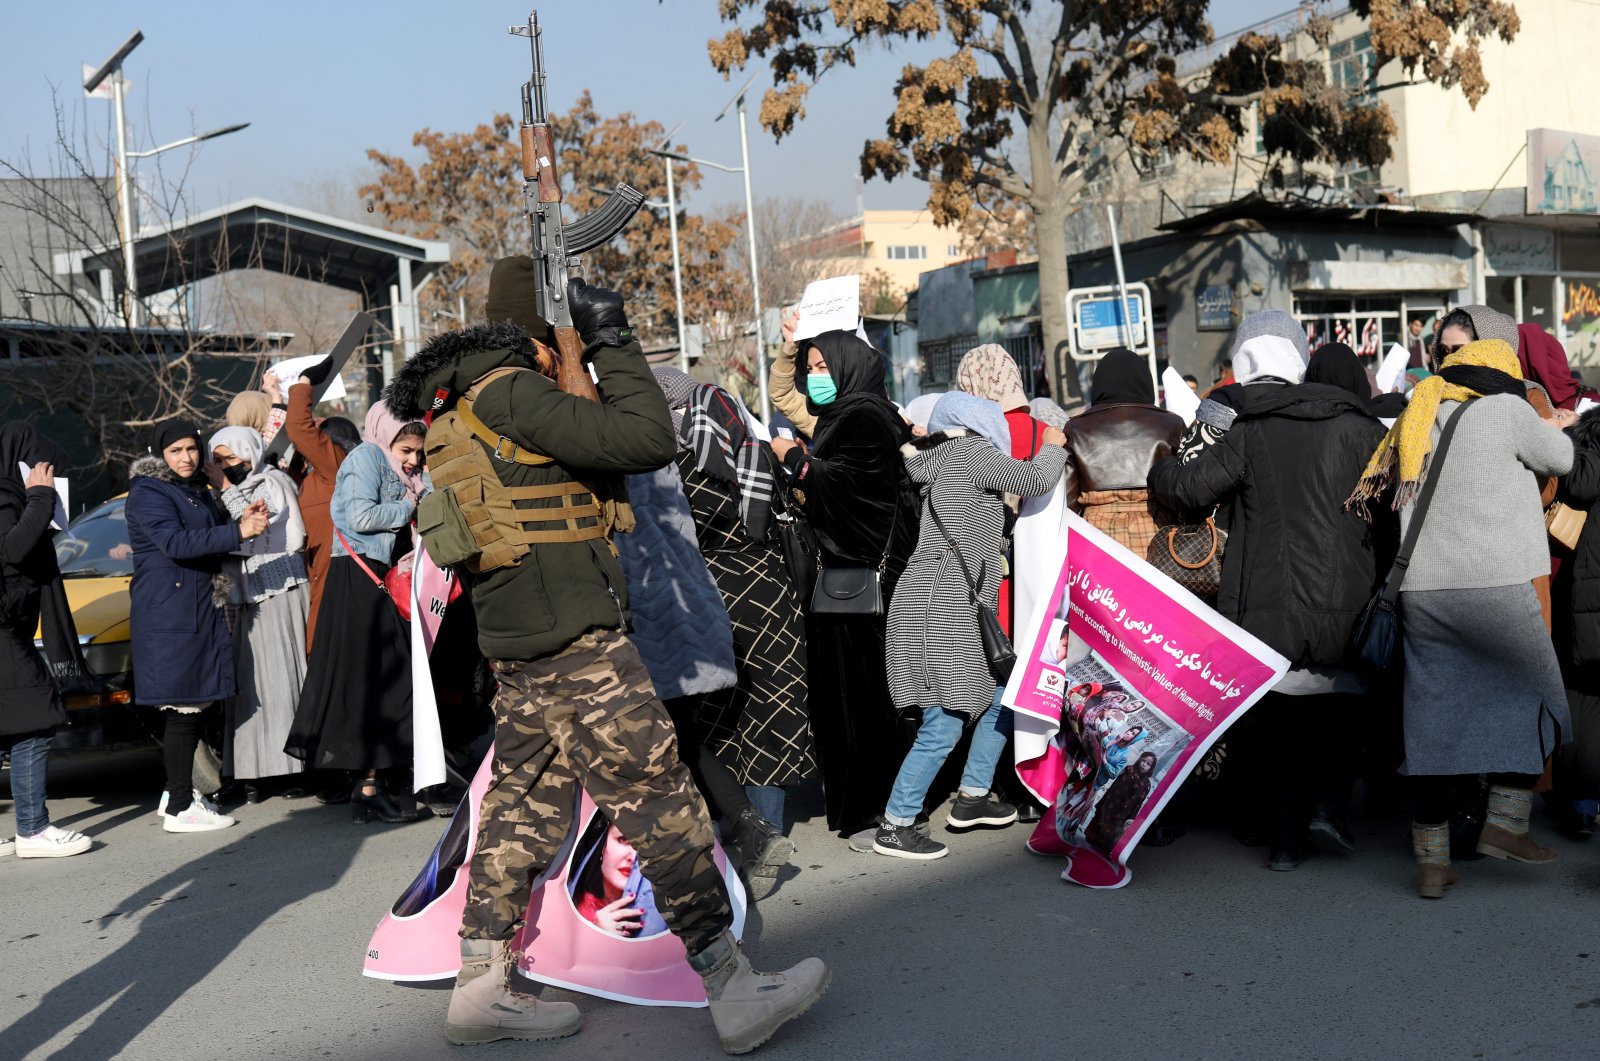 A member of the Taliban fires in the air to disperse a group of Afghan women during a rally to protest against the Taliban&#039;s restrictions on women in Kabul, Afghanistan, Dec. 28, 2021. (Reuters Photo)